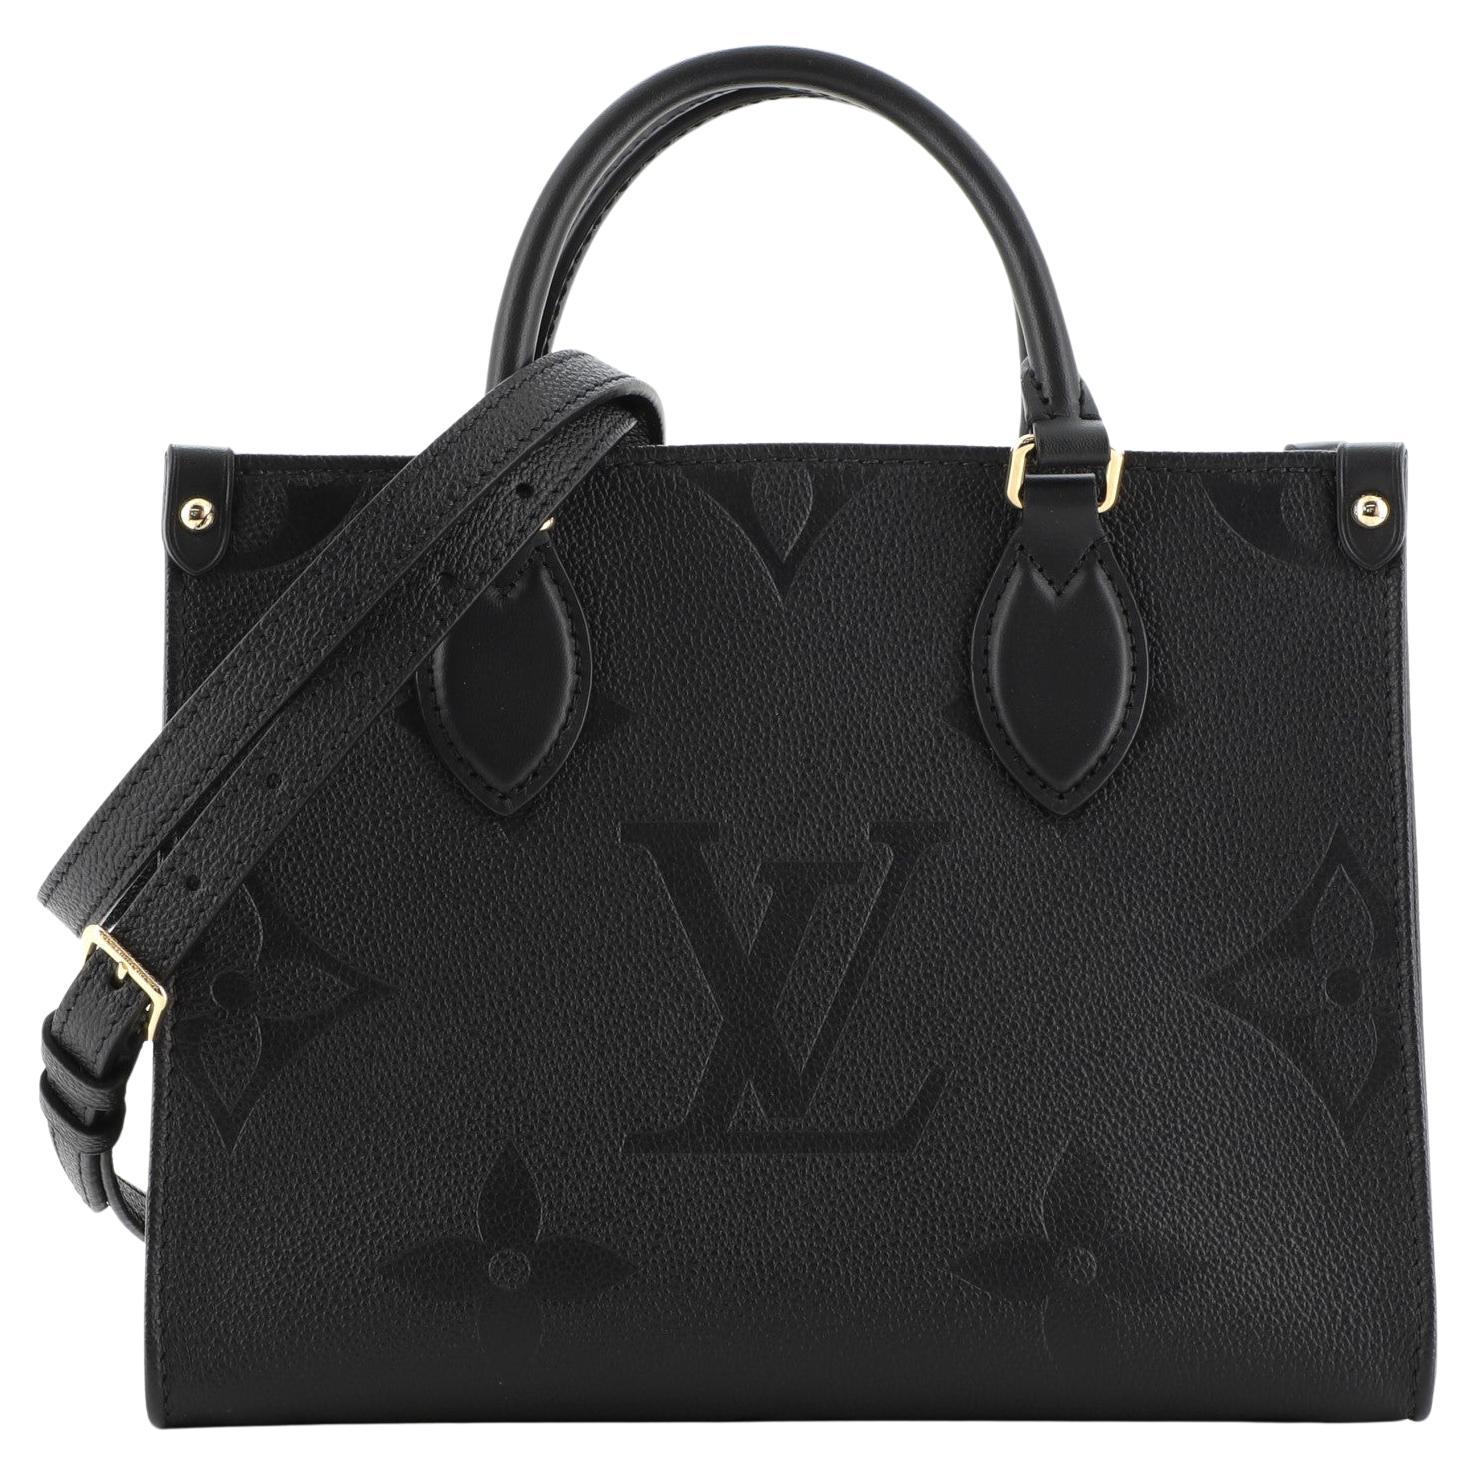 Louis Vuitton OnTheGo pm Tote Bags. 🤩 Perfection down to the